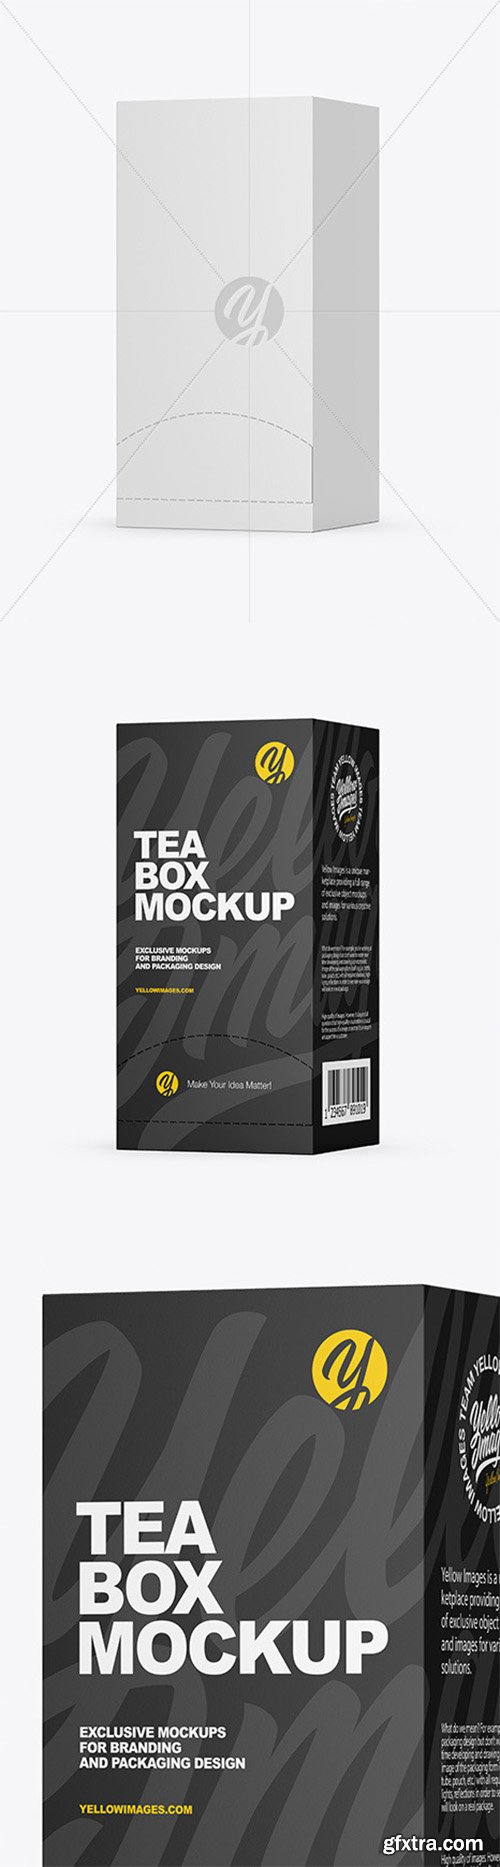 Download Box Mockup In Photoshop Download Free And Premium Psd Mockup Templates And Design Assets Yellowimages Mockups